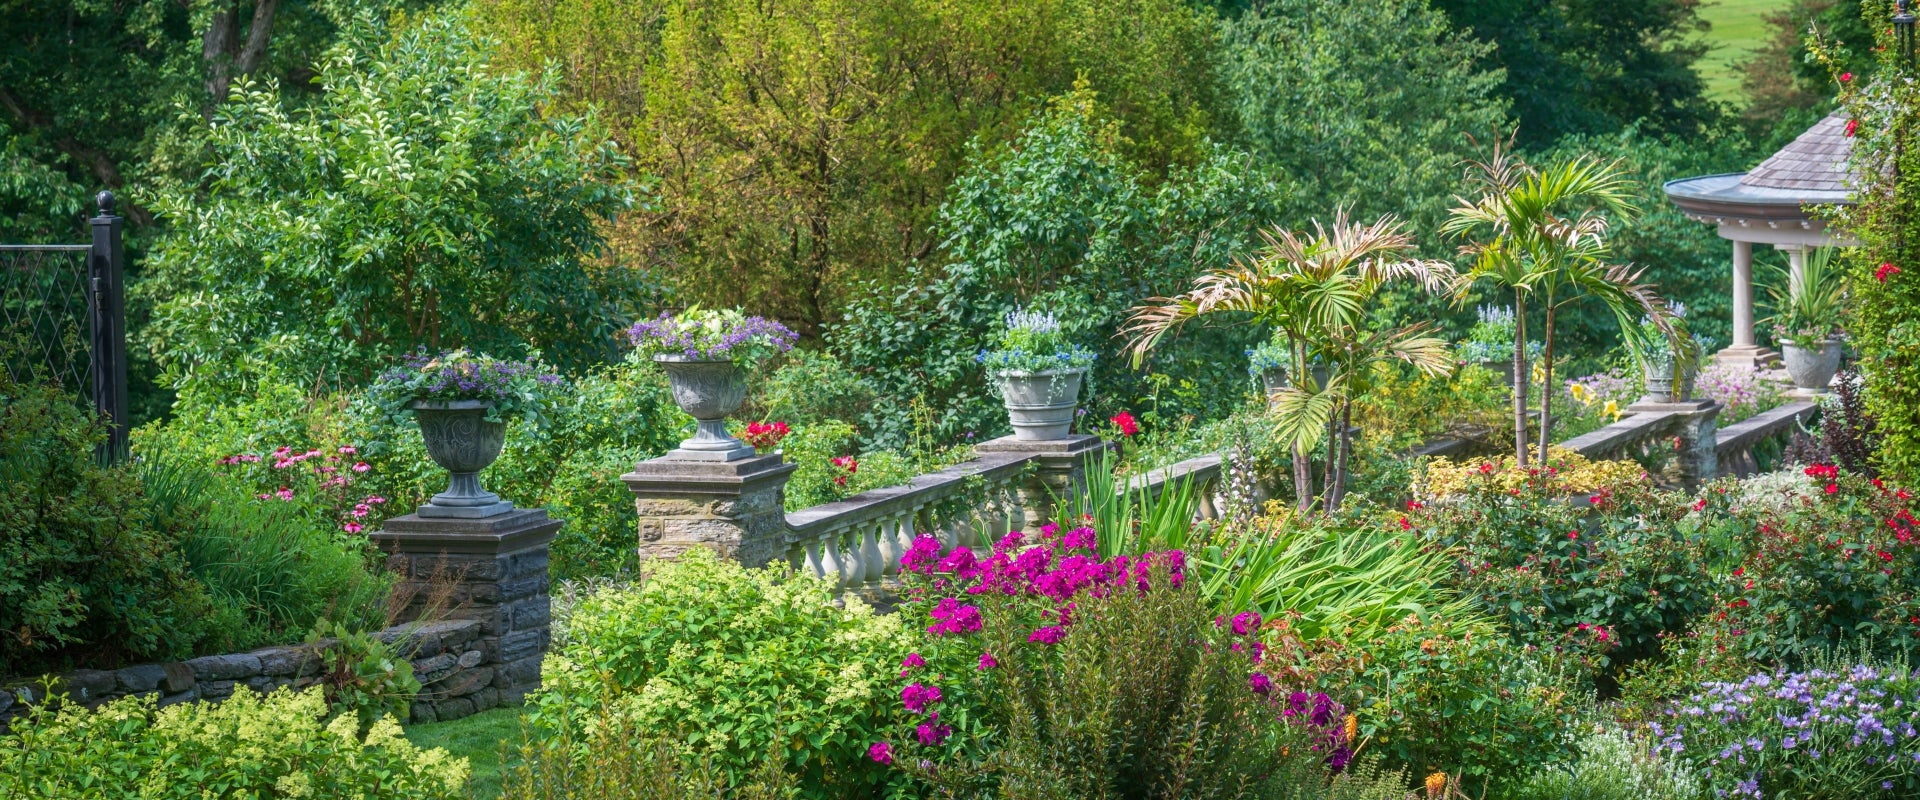 A garden in bloom with a stone wall decorated with planters and a gazebo. 